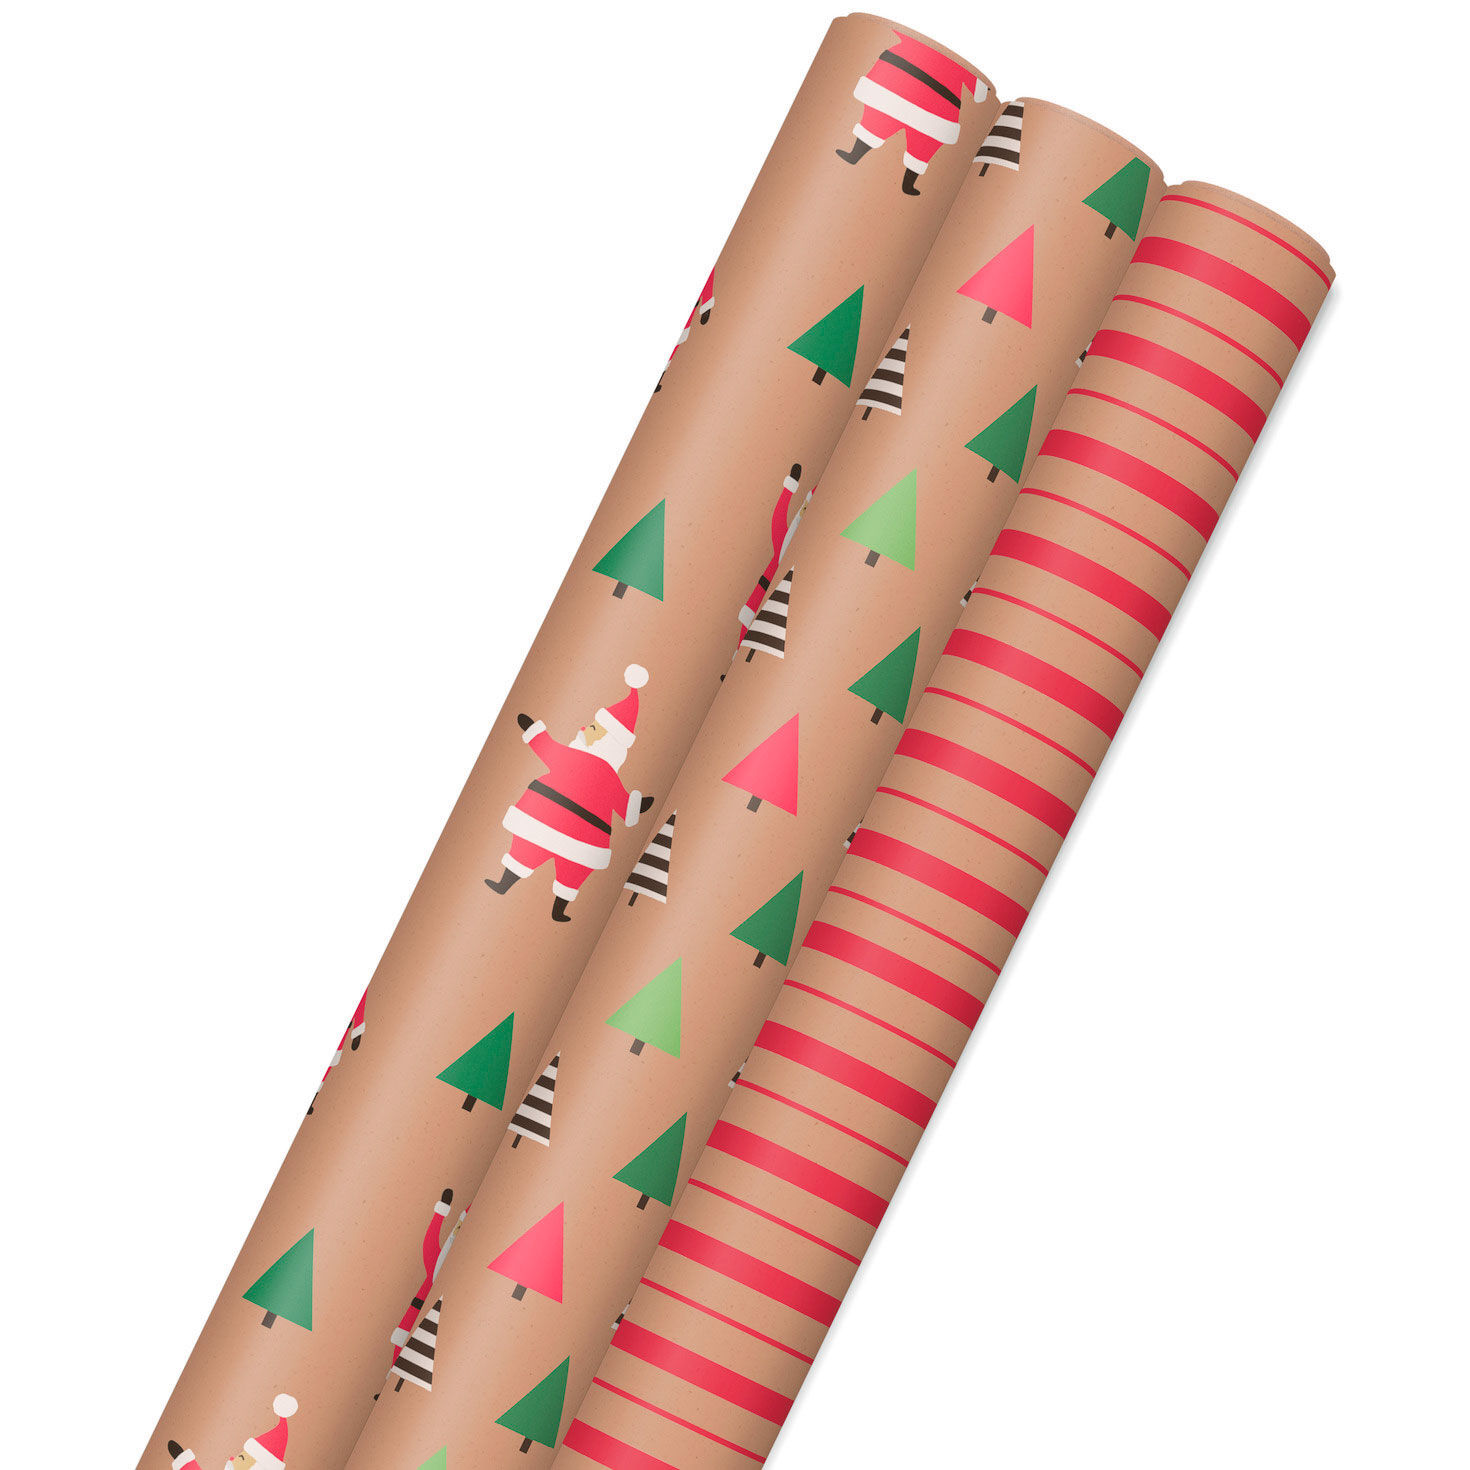 Merry Kraft Prints 3-Pack Christmas Wrapping Paper, 90 sq. ft. - Wrapping  Paper Sets - Hallmark